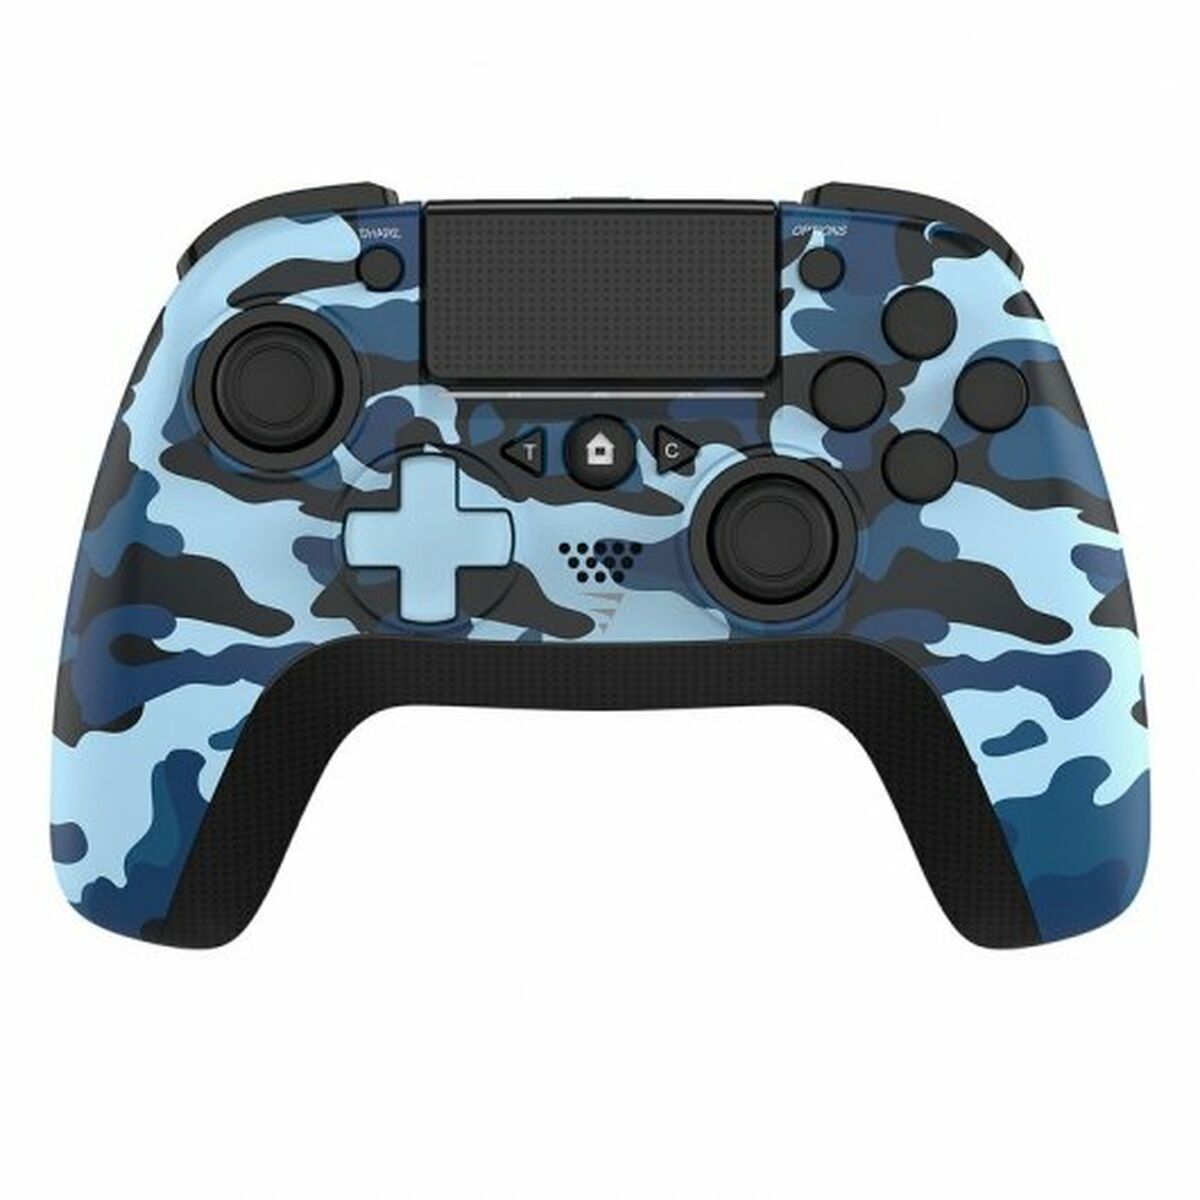 Pad do gier/ Gamepad VoltEdge CX50